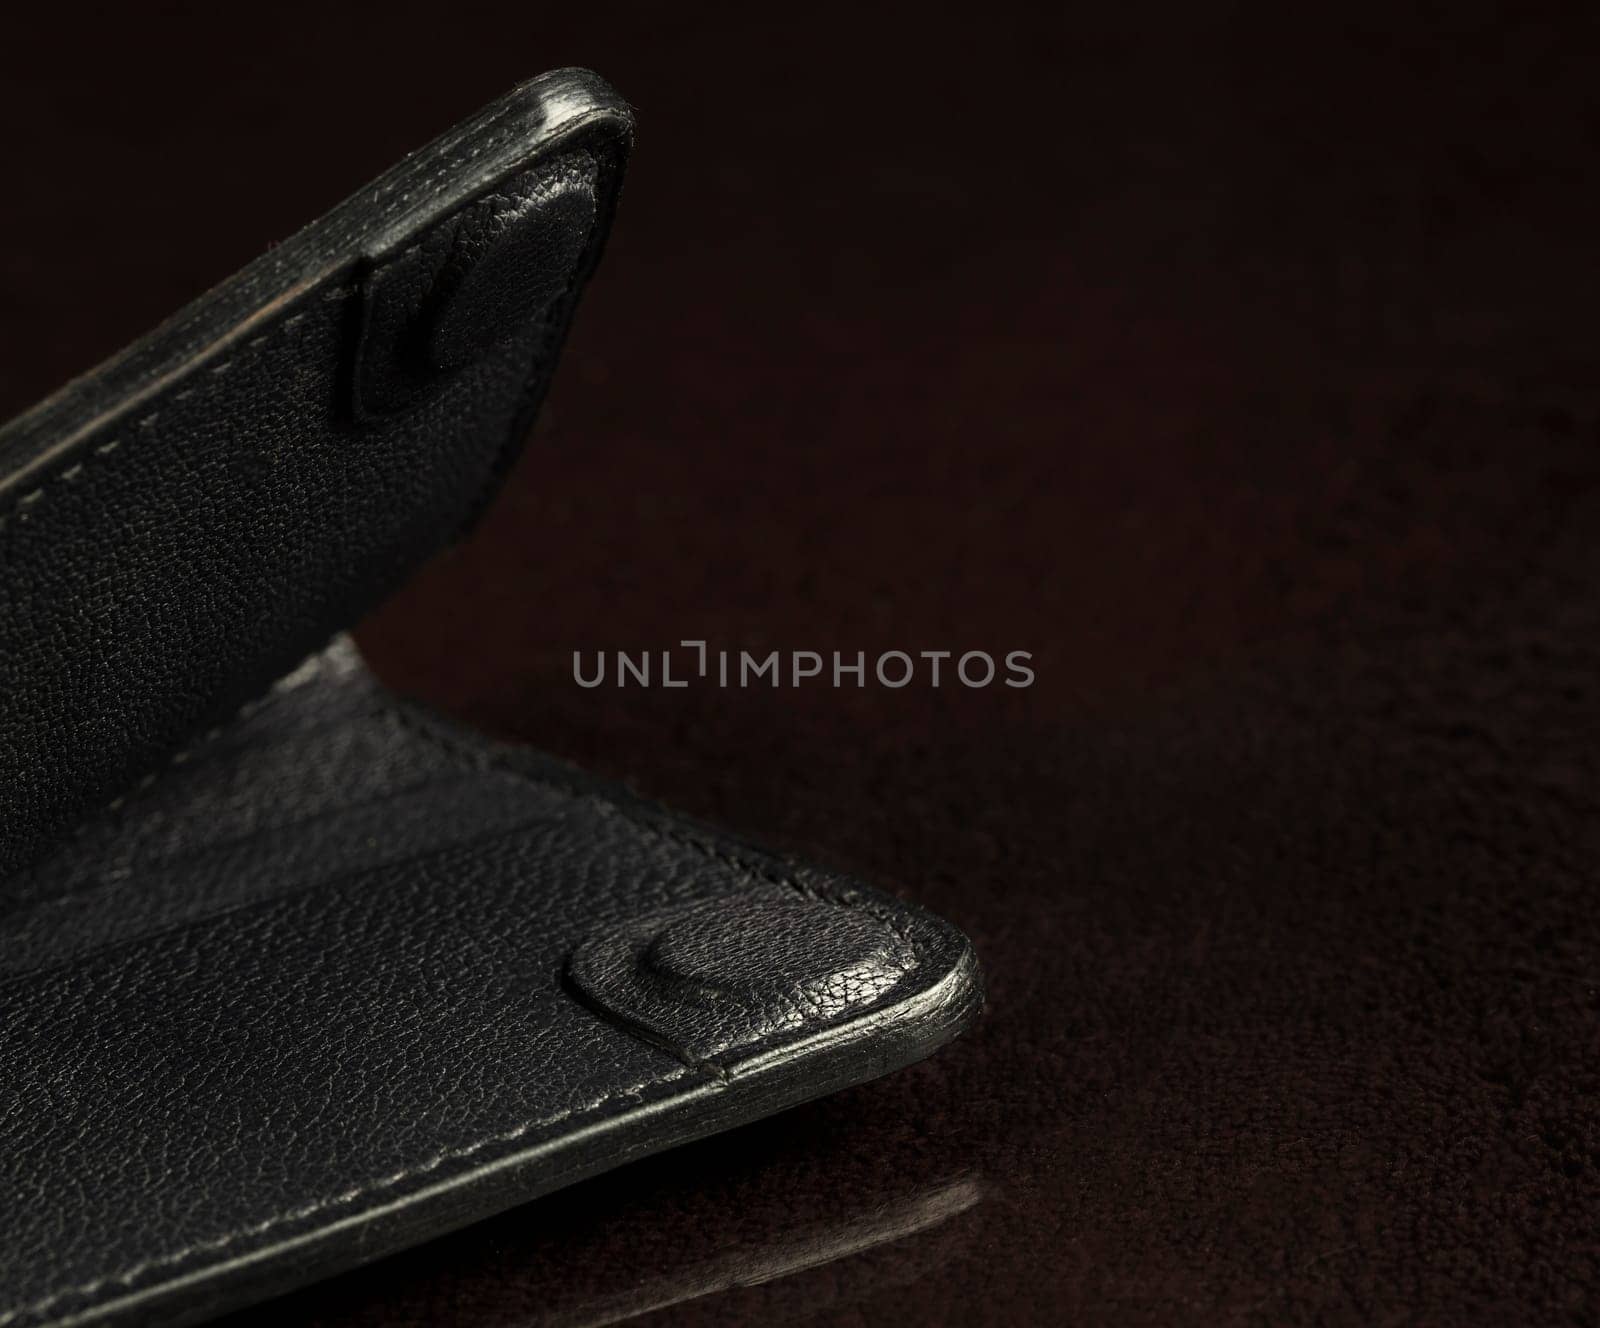 Part of a black leather wallet on a black background.